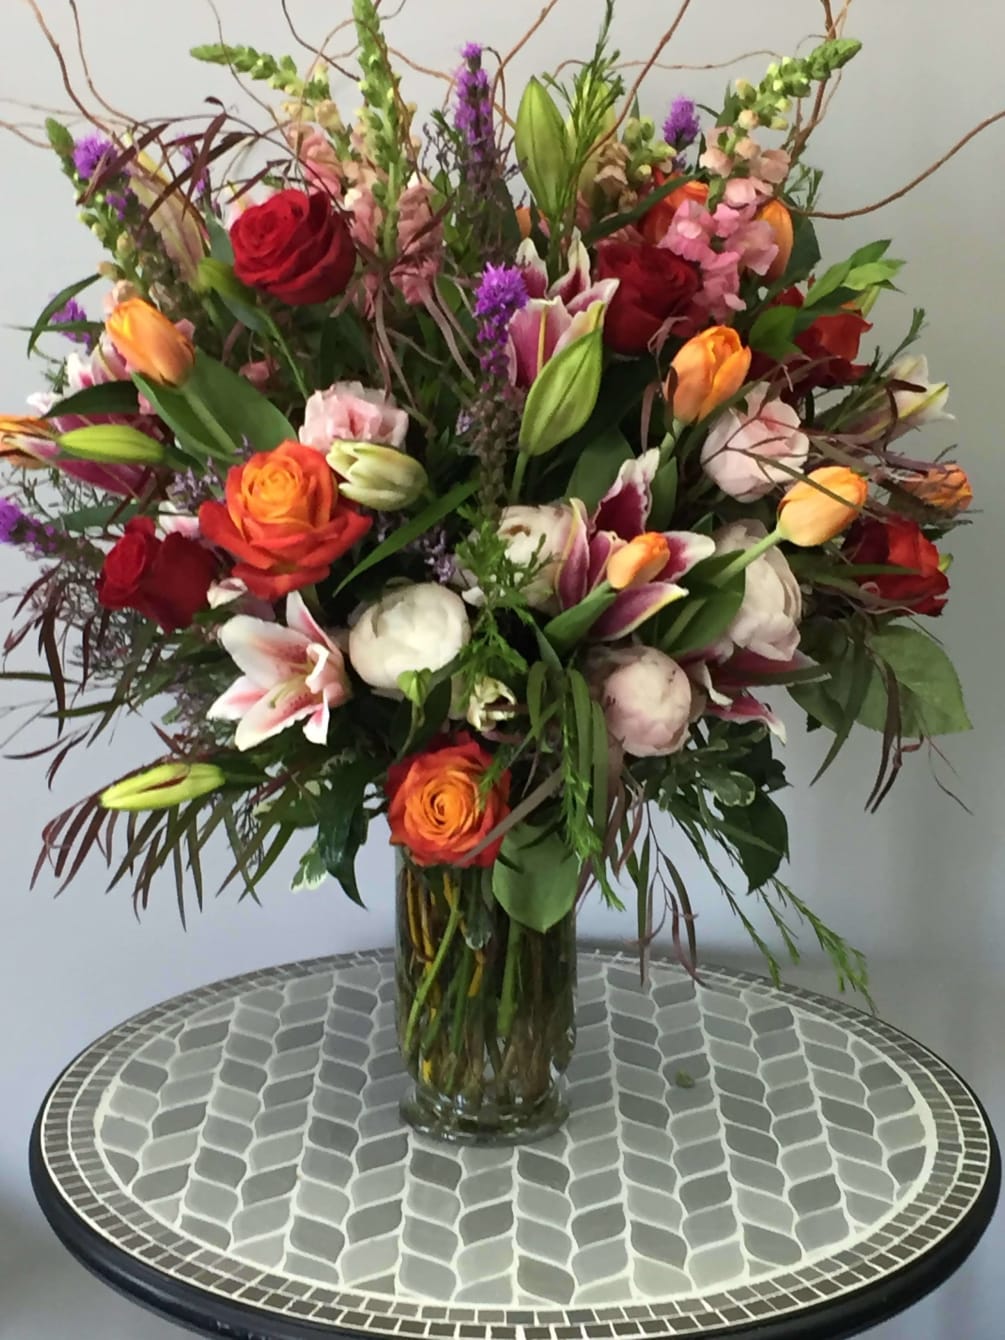 This beautiful arrangement is filled with oriental lilies, tulips, roses, liatris and